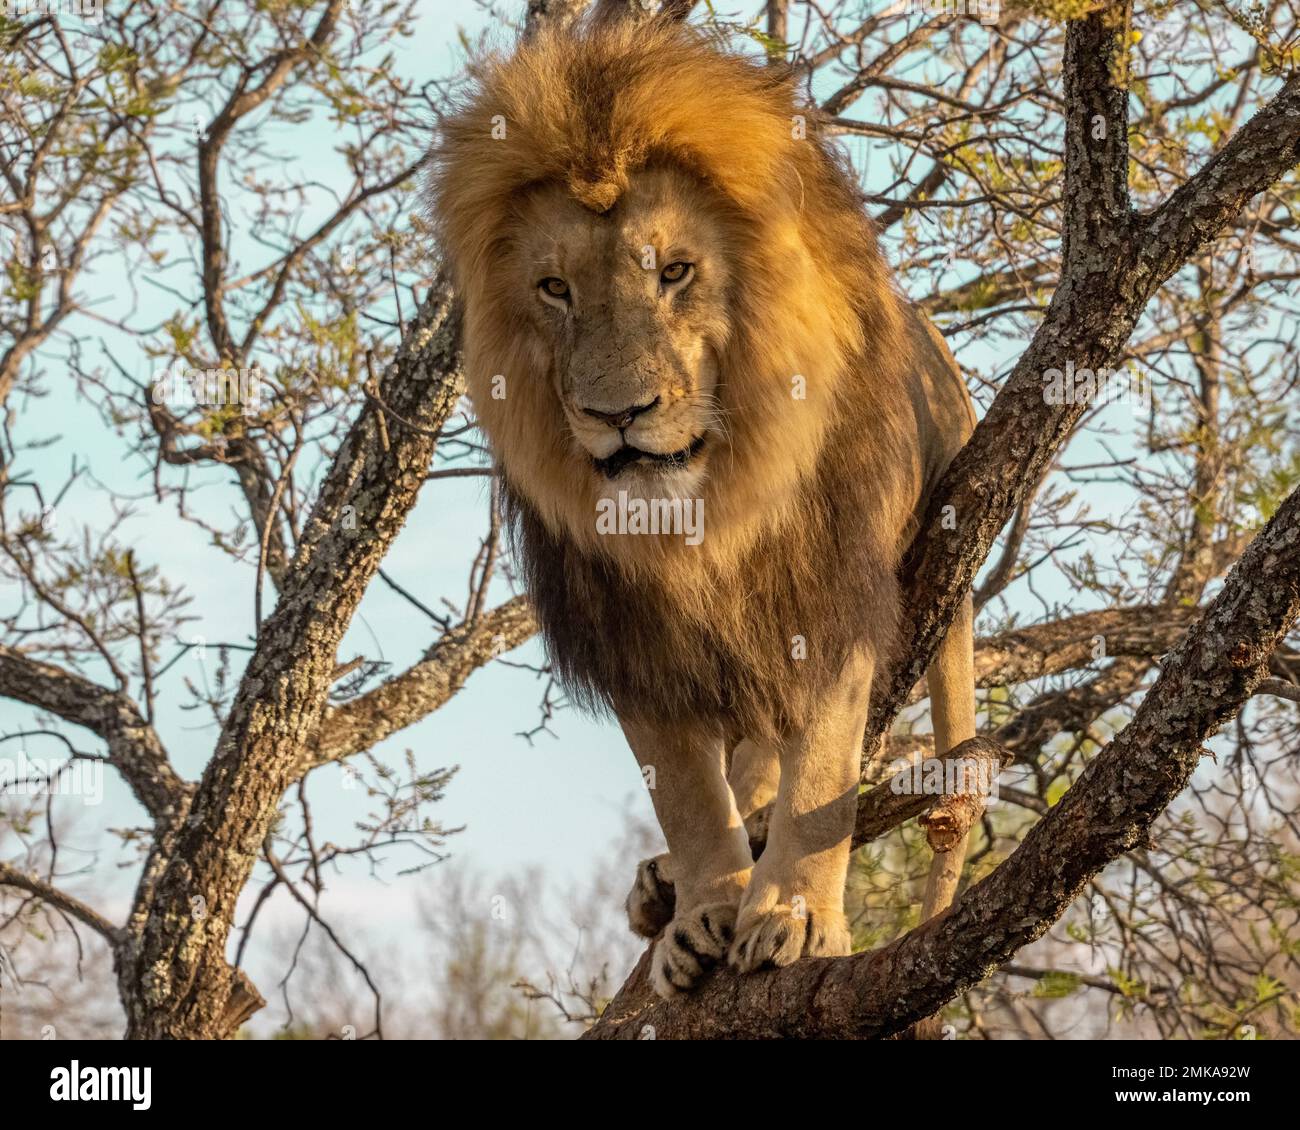 Male Lion in South Africa standing in a Tree Stock Photo